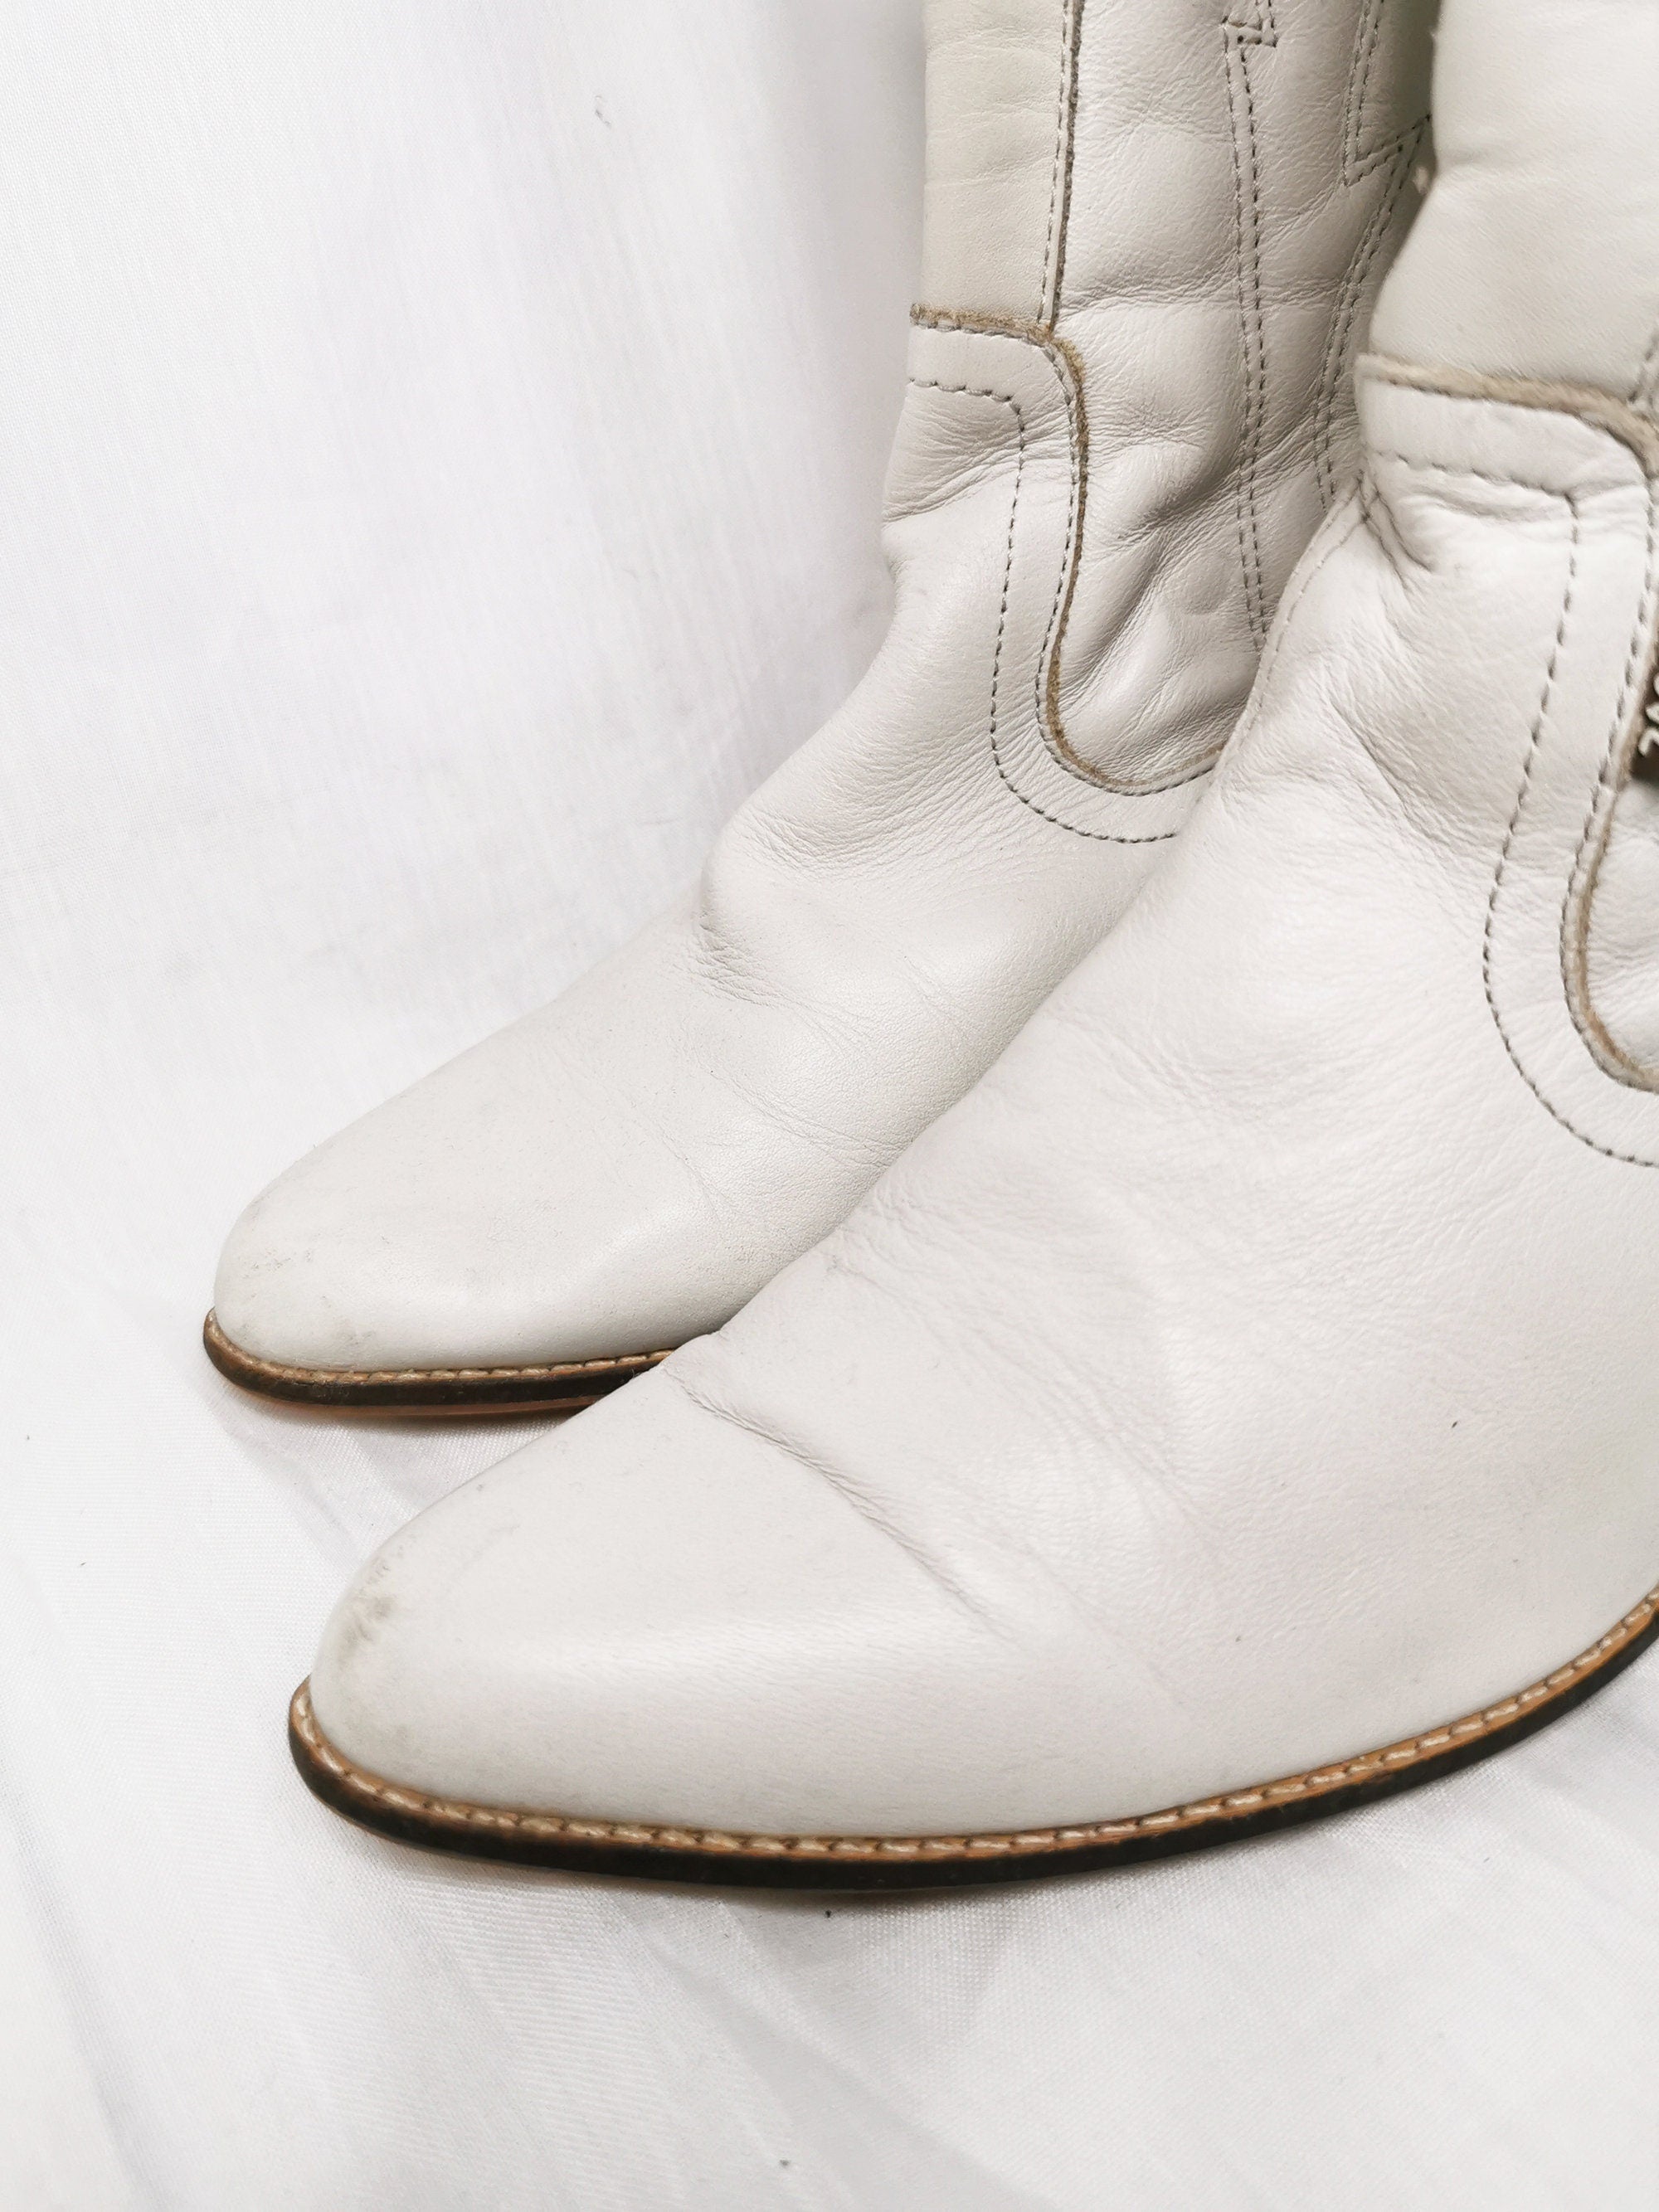 Vintage 90s milky white leather Western Cowboy shoes